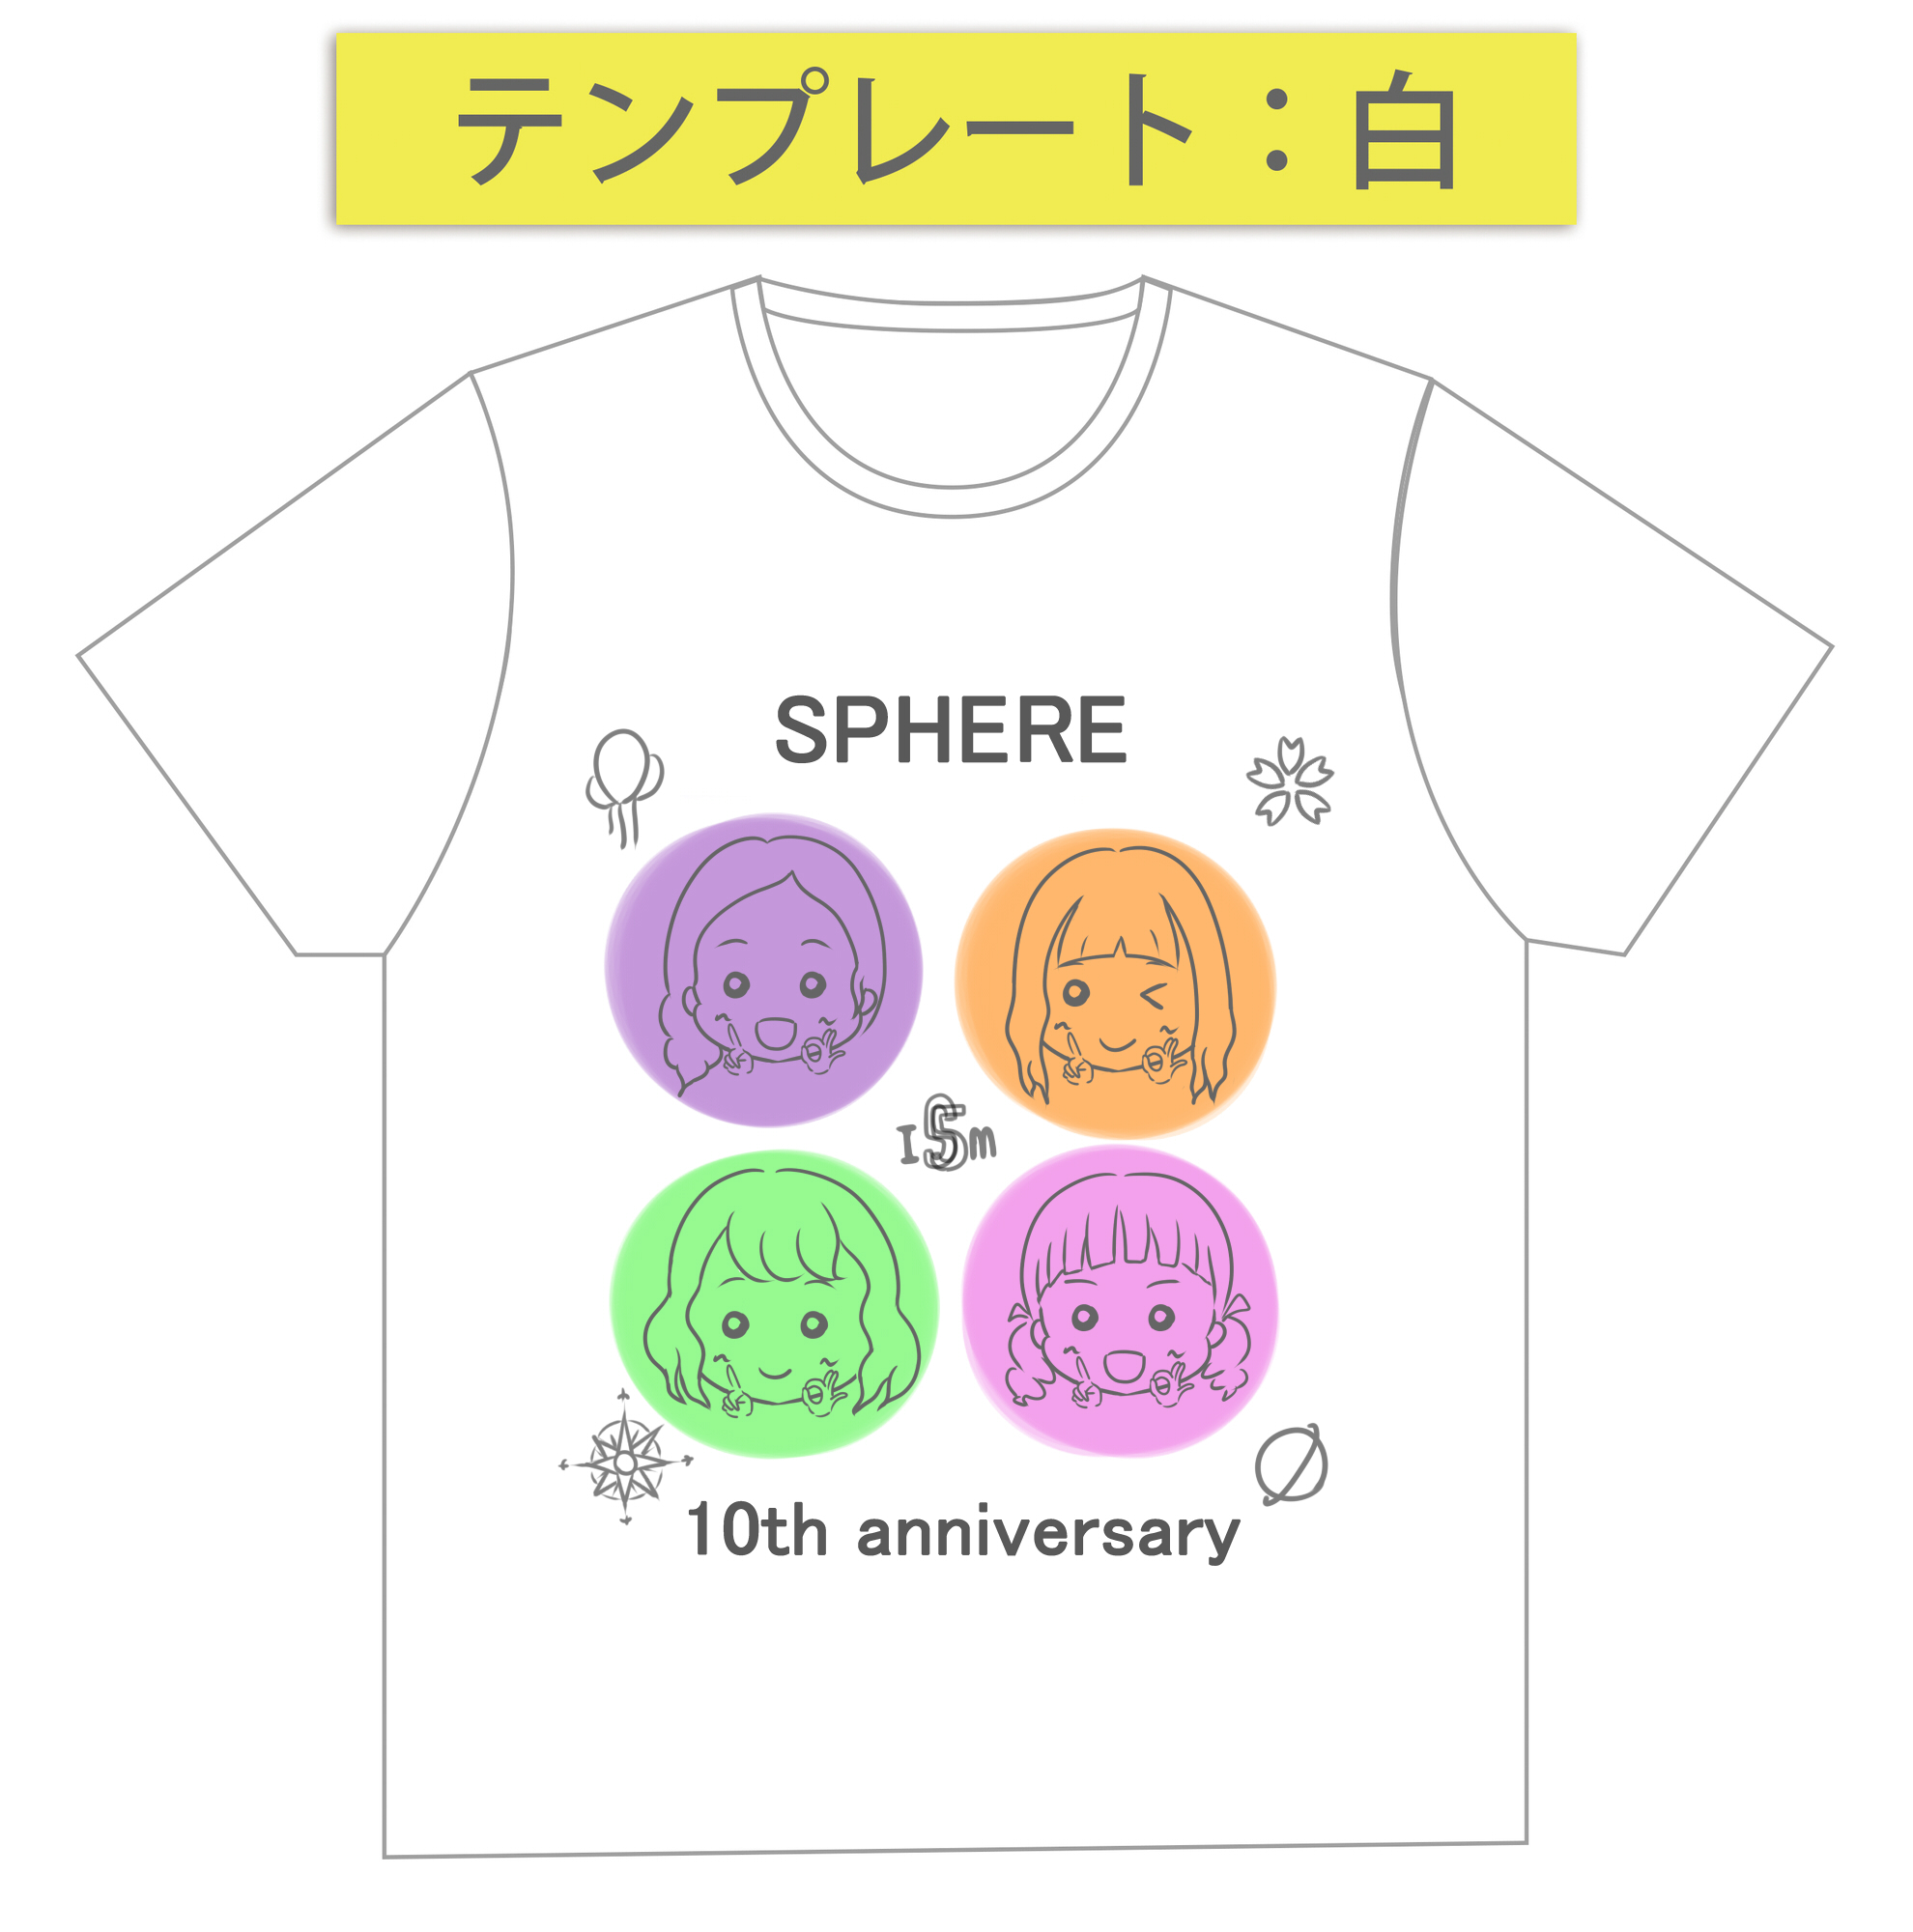 LAWSON presents Sphere 10th anniversary Live tour 2019 “A10tion 